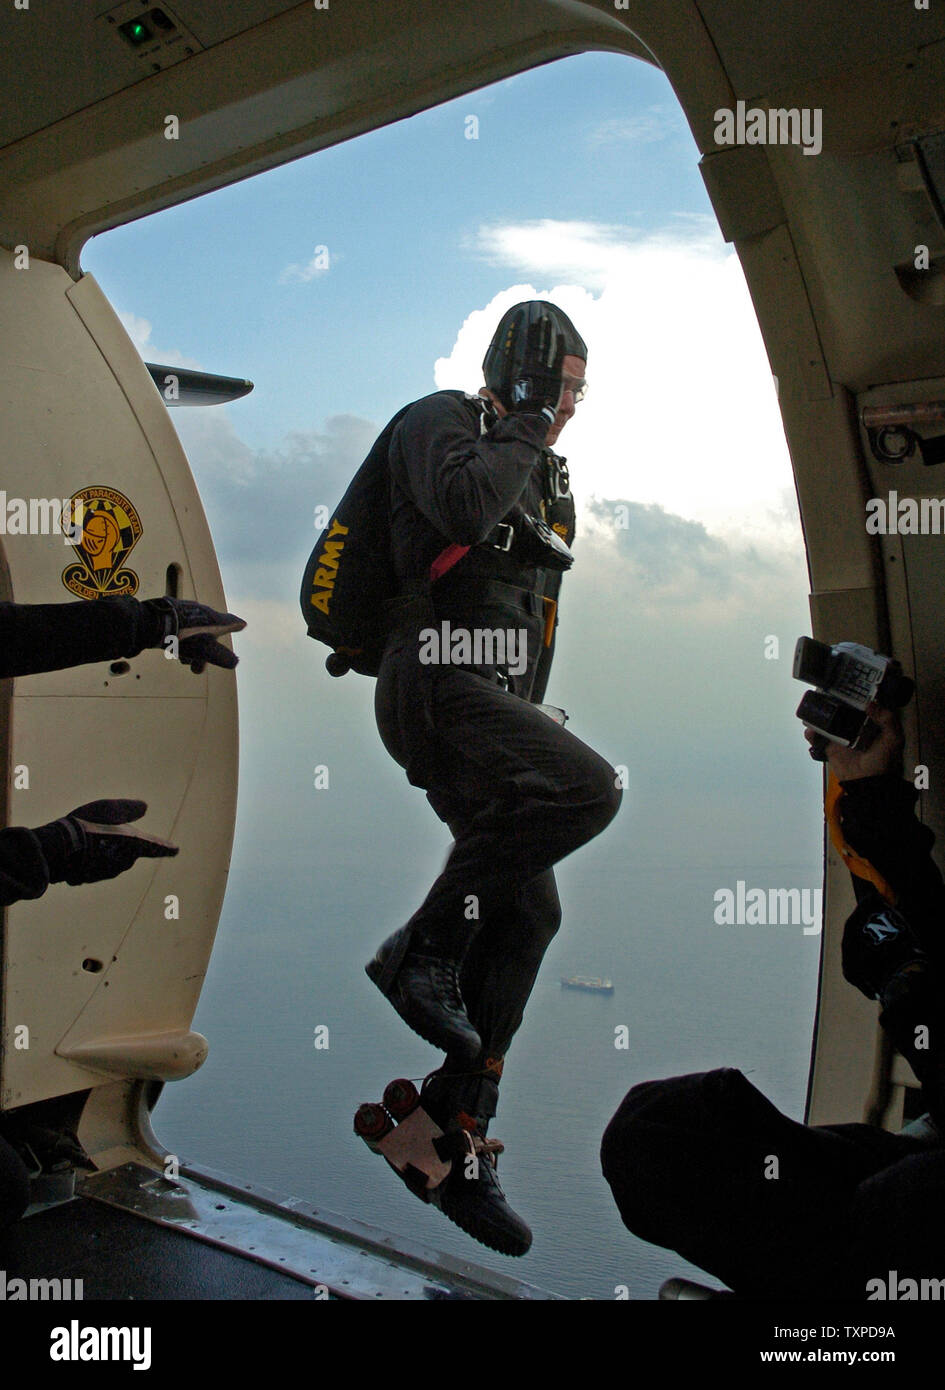 Over the skies of Ft. Lauderdale, Florida on April 27, 2005, the narrating member of the US Army Golden Knights leaps into the slipstream while practicing for the McDonalds Air Sea Show scheduled for April 30 and May 1, 2005. (UPI Photo/Marino/Cantrell) Stock Photo